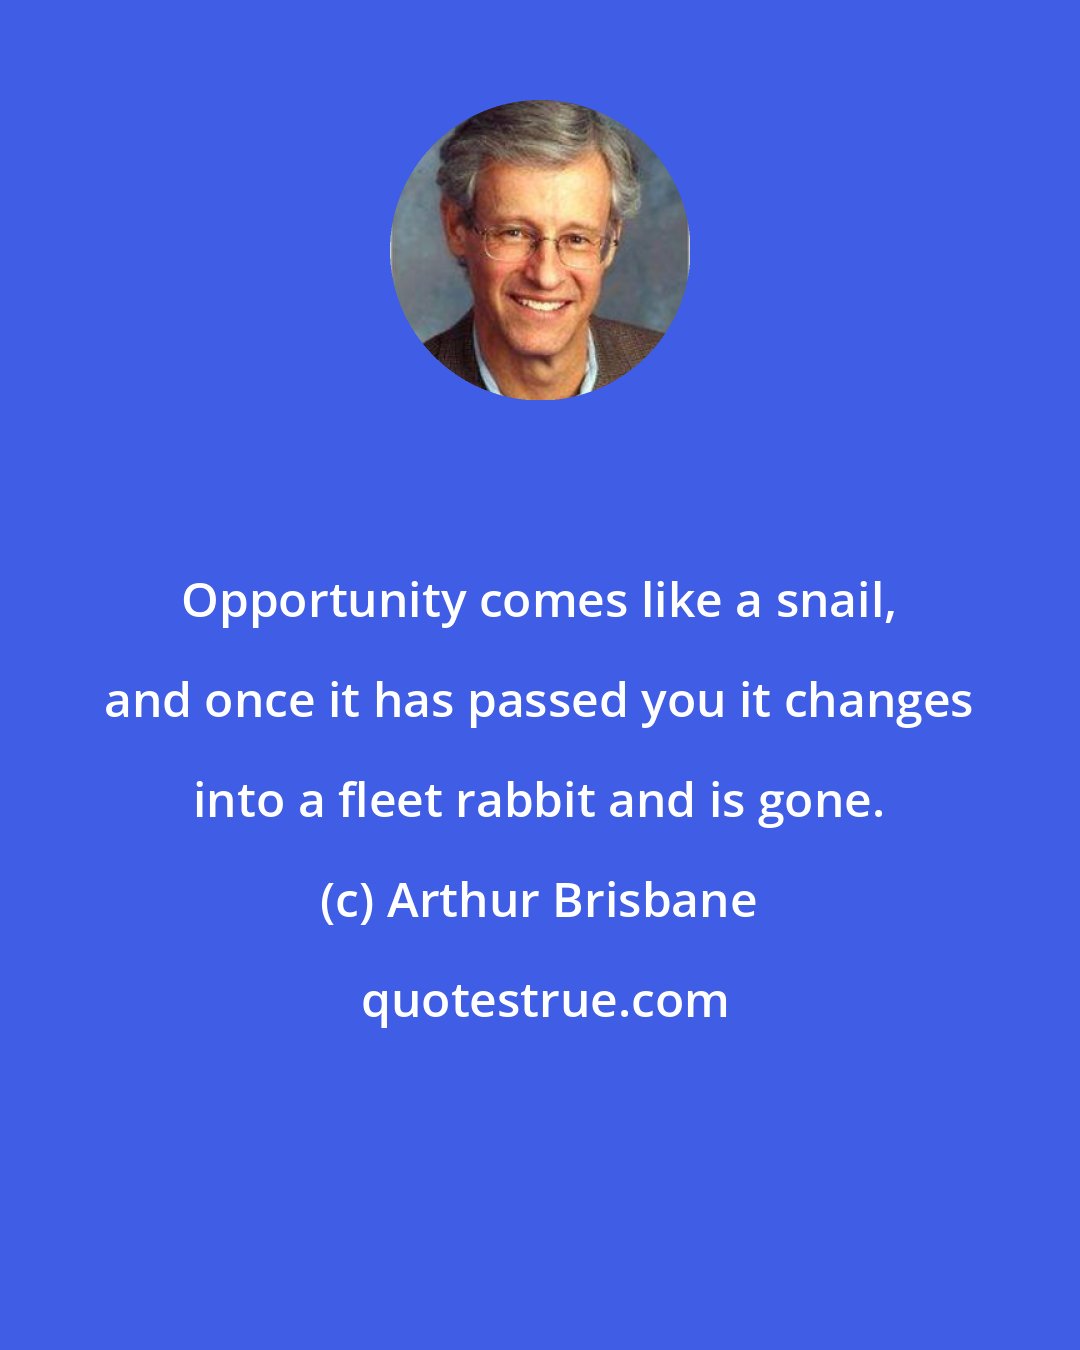 Arthur Brisbane: Opportunity comes like a snail, and once it has passed you it changes into a fleet rabbit and is gone.